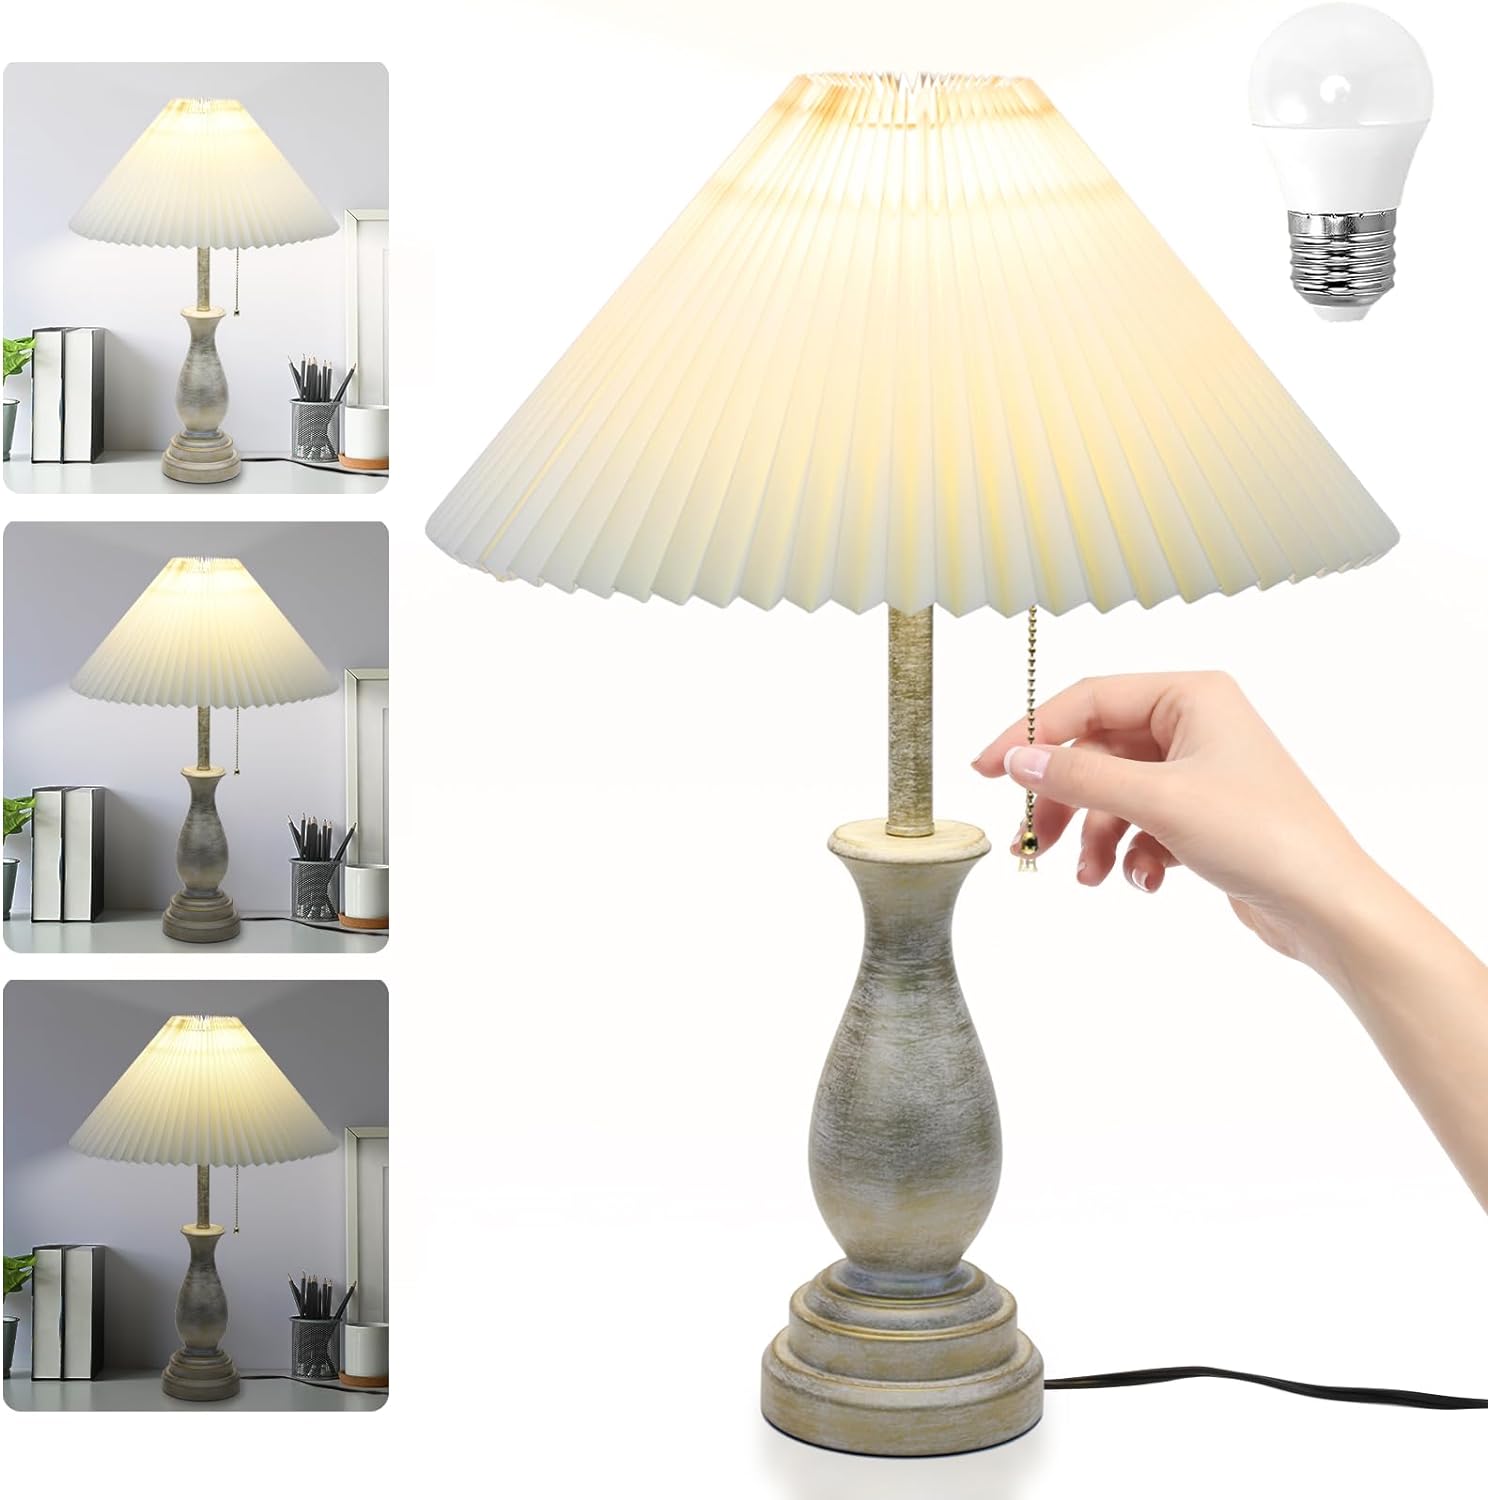 Farmhouse Table Lamp with Pull Chain Switch Control 3-Way Dimmable Table Lamp, Modern Nightstand Lamp Bedside Desk Lamp with Fabric Shade for Living Room Bedroom Hotel (Metal-Pack-01)